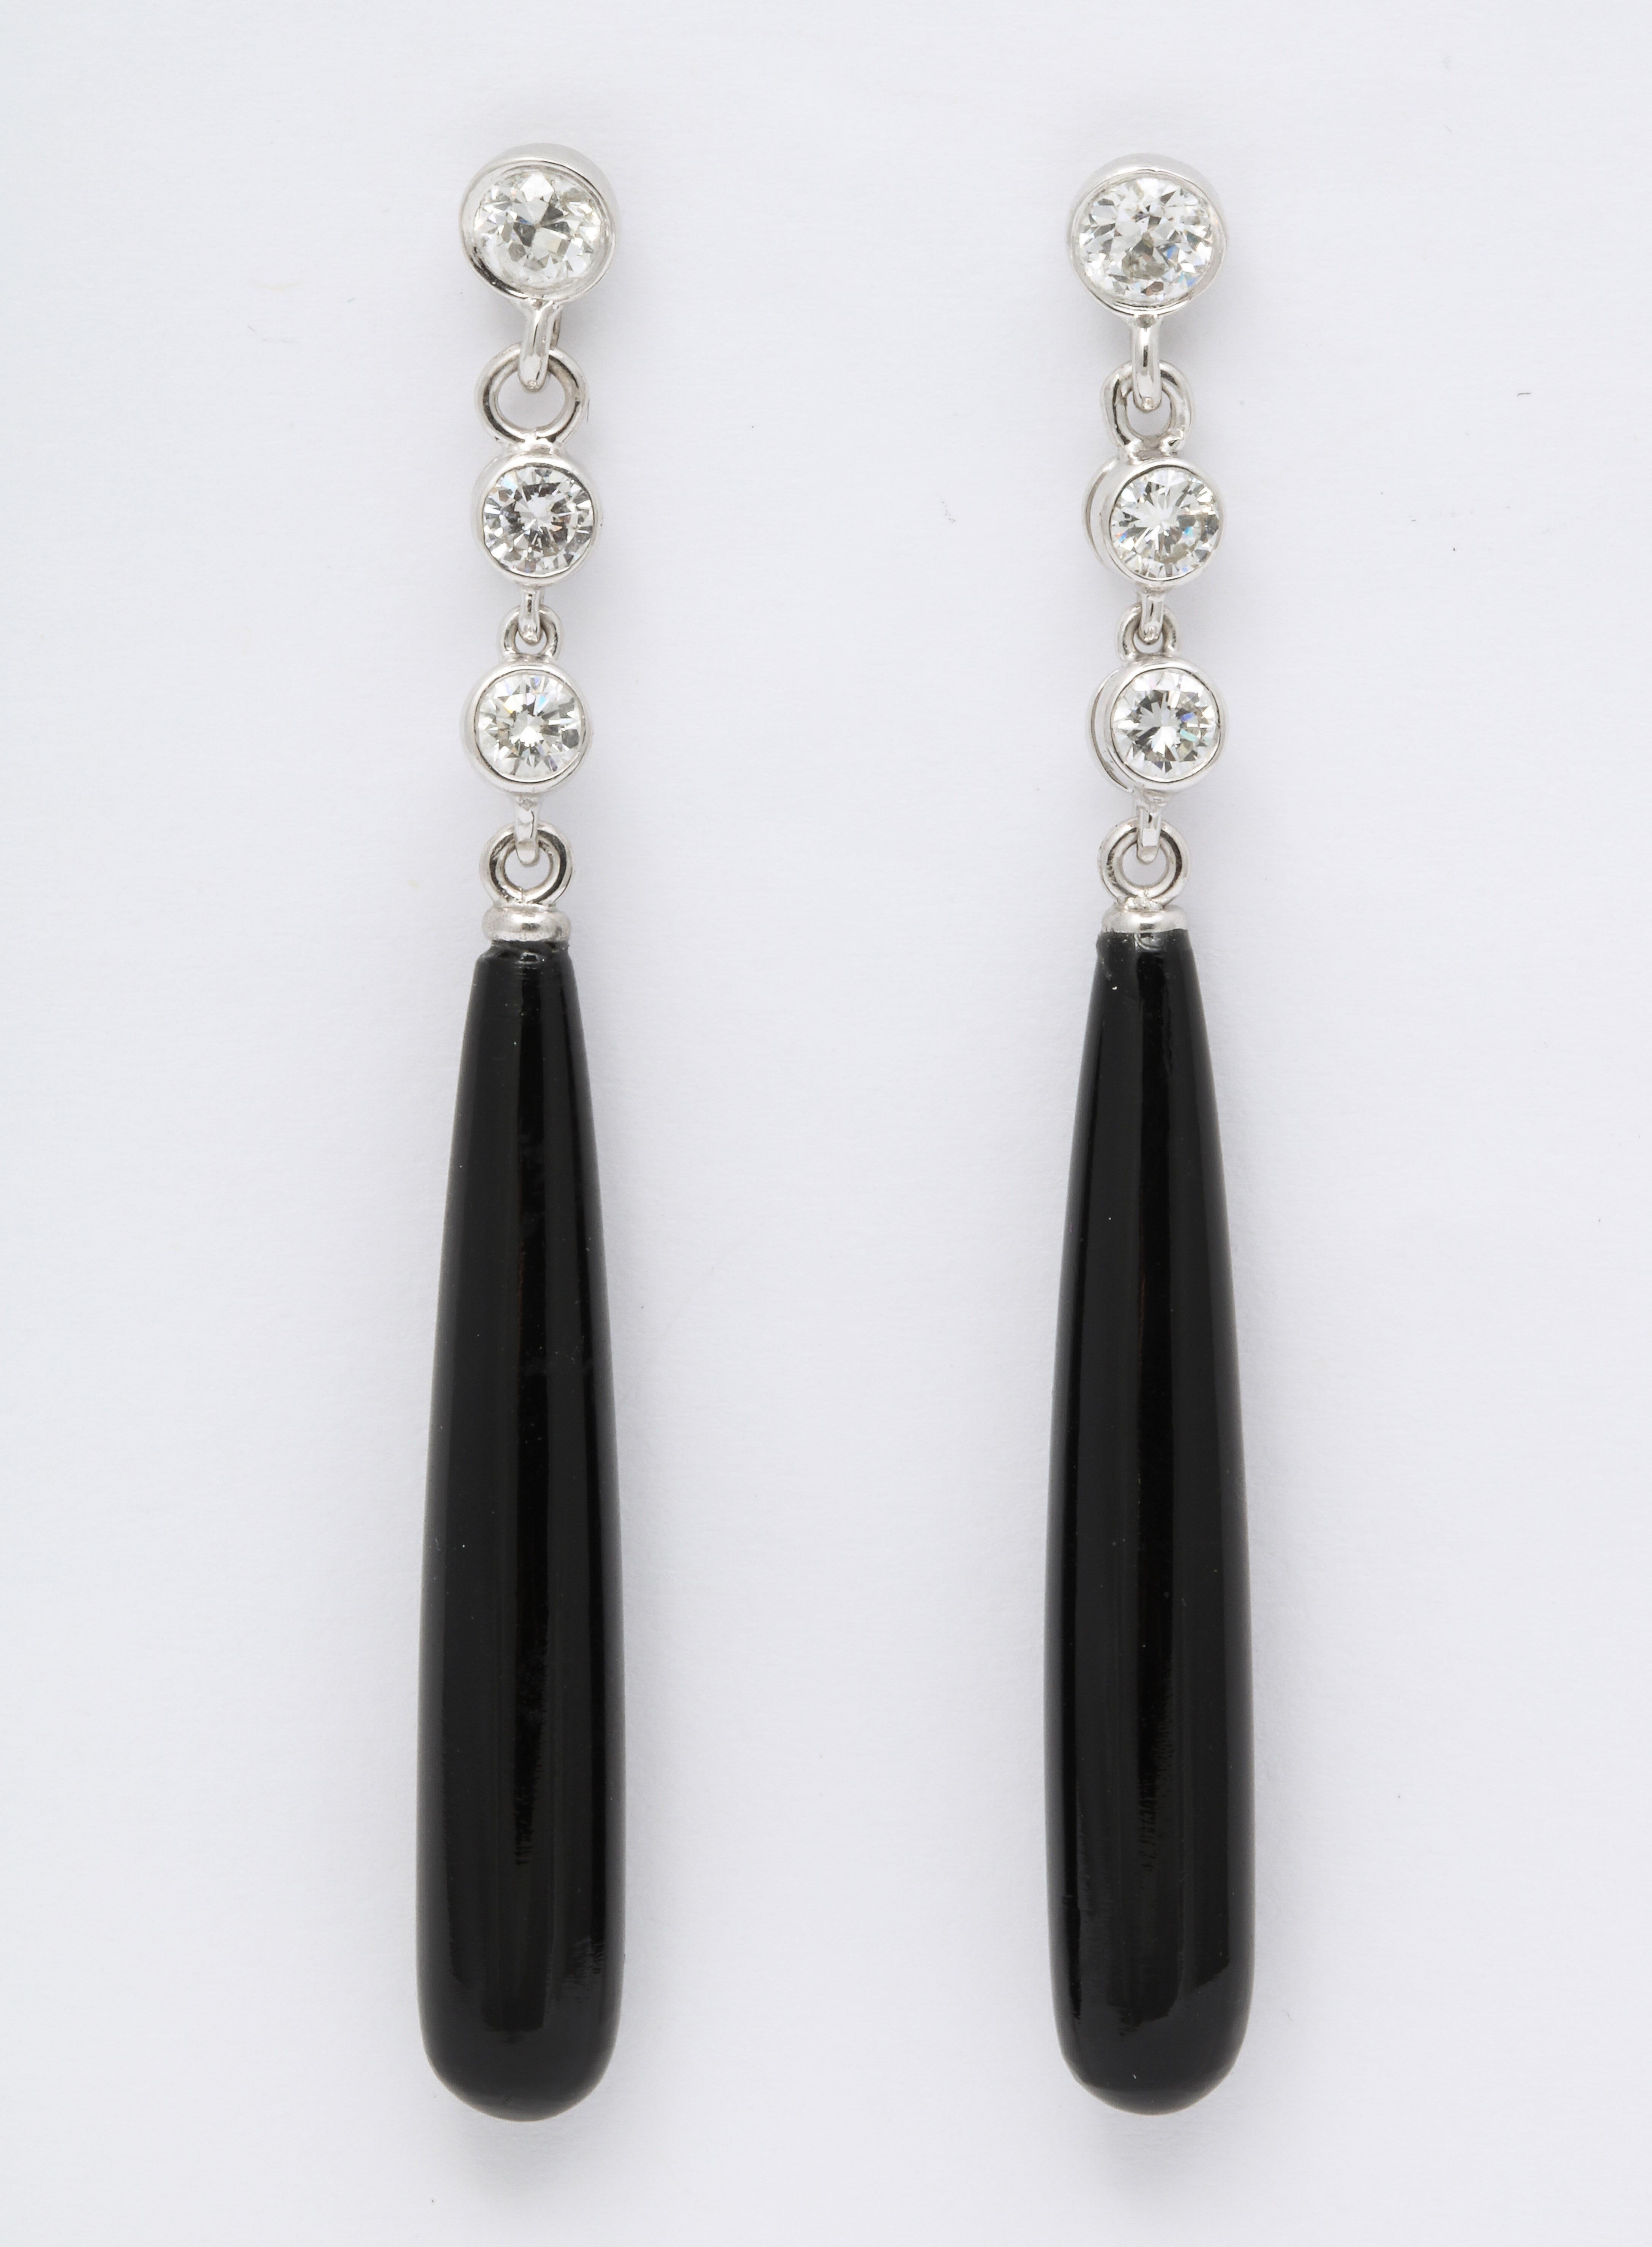 These Onyx and Diamond Pendant Earrings are a classic Art Deco style and can be worn day or evening . They are suspended from three bezel set diamonds and are made so that the onyx pendant can be removed and a crystal pendant can be attached.